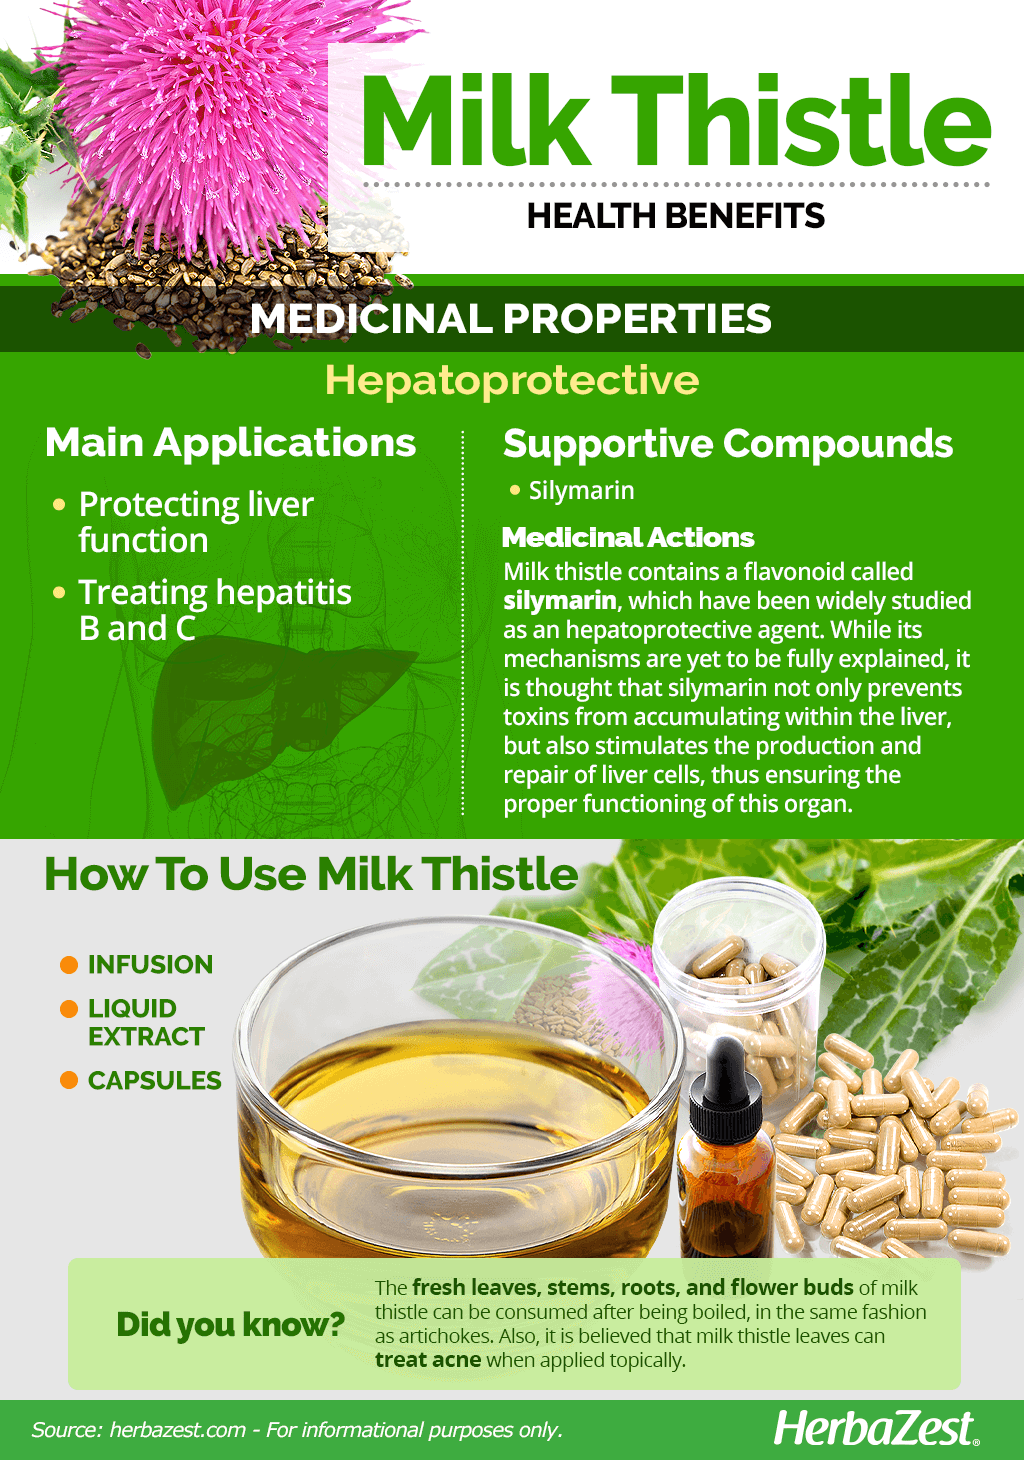 All About Milk Thistle